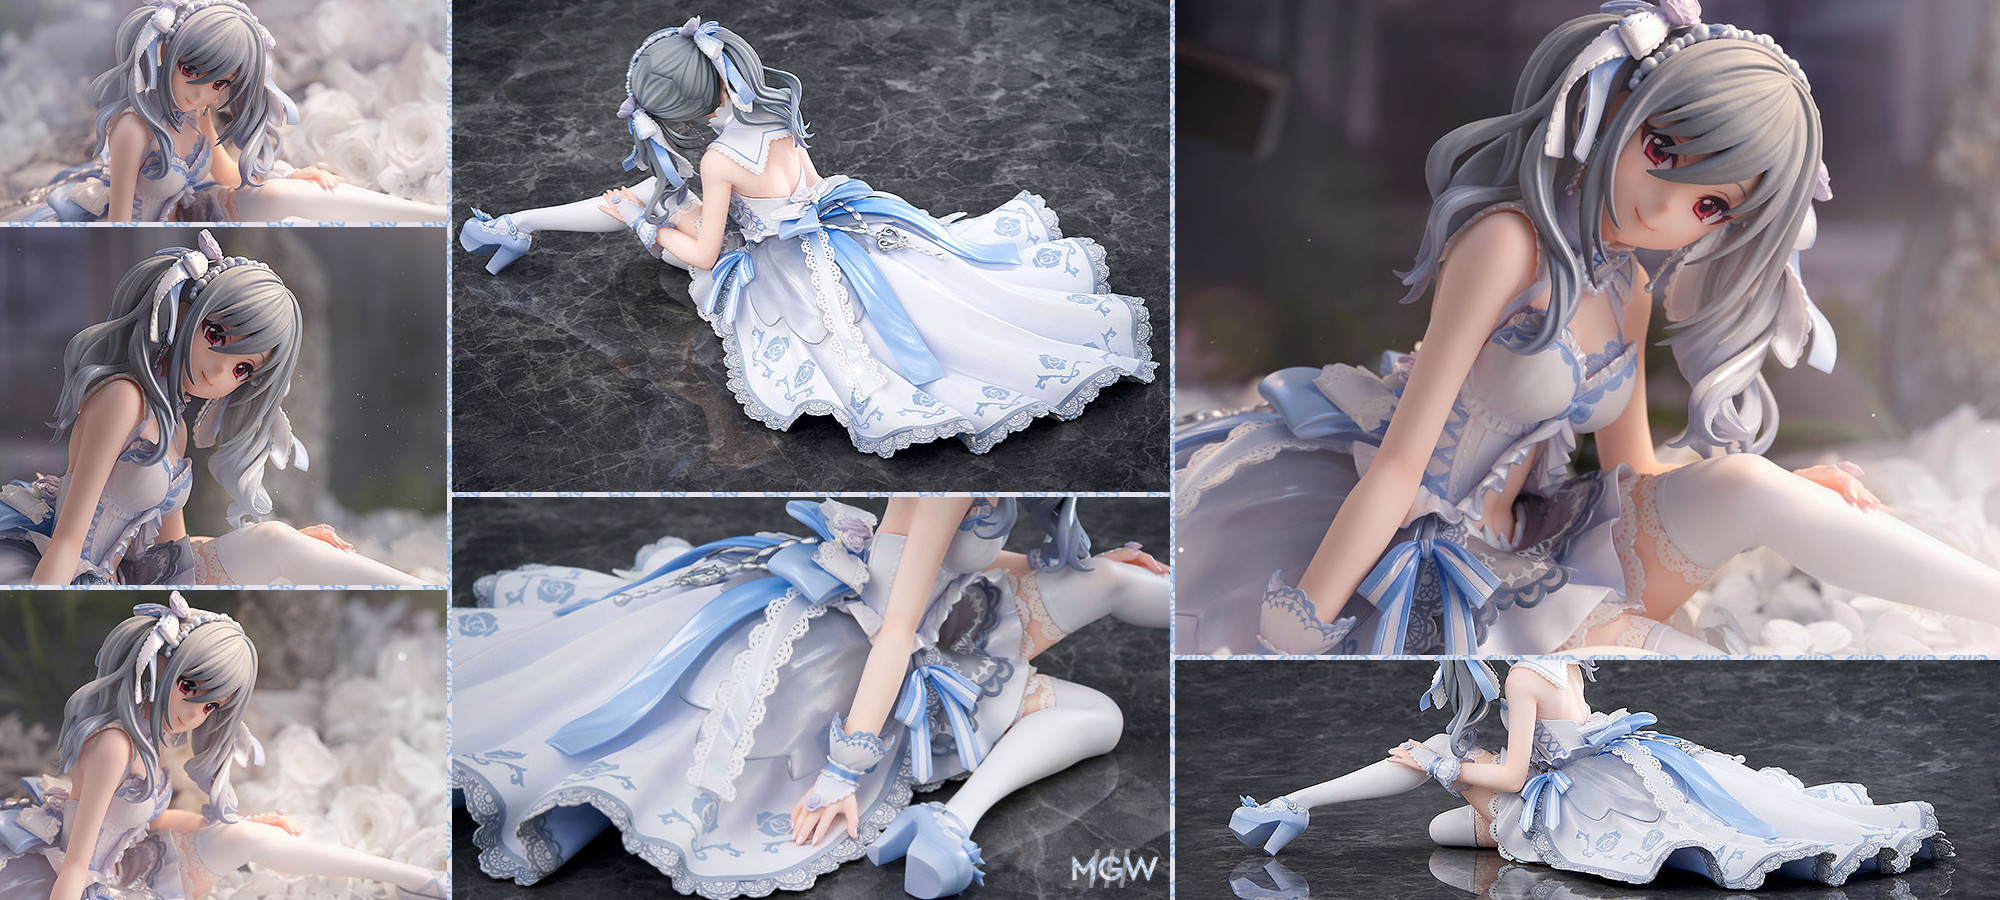 Kanzaki Ranko White Princess of the Banquet ver. by ALUMINA from THE iDOLM@STER CINDERELLA GIRLS MyGrailWatch Anime Figure Guide